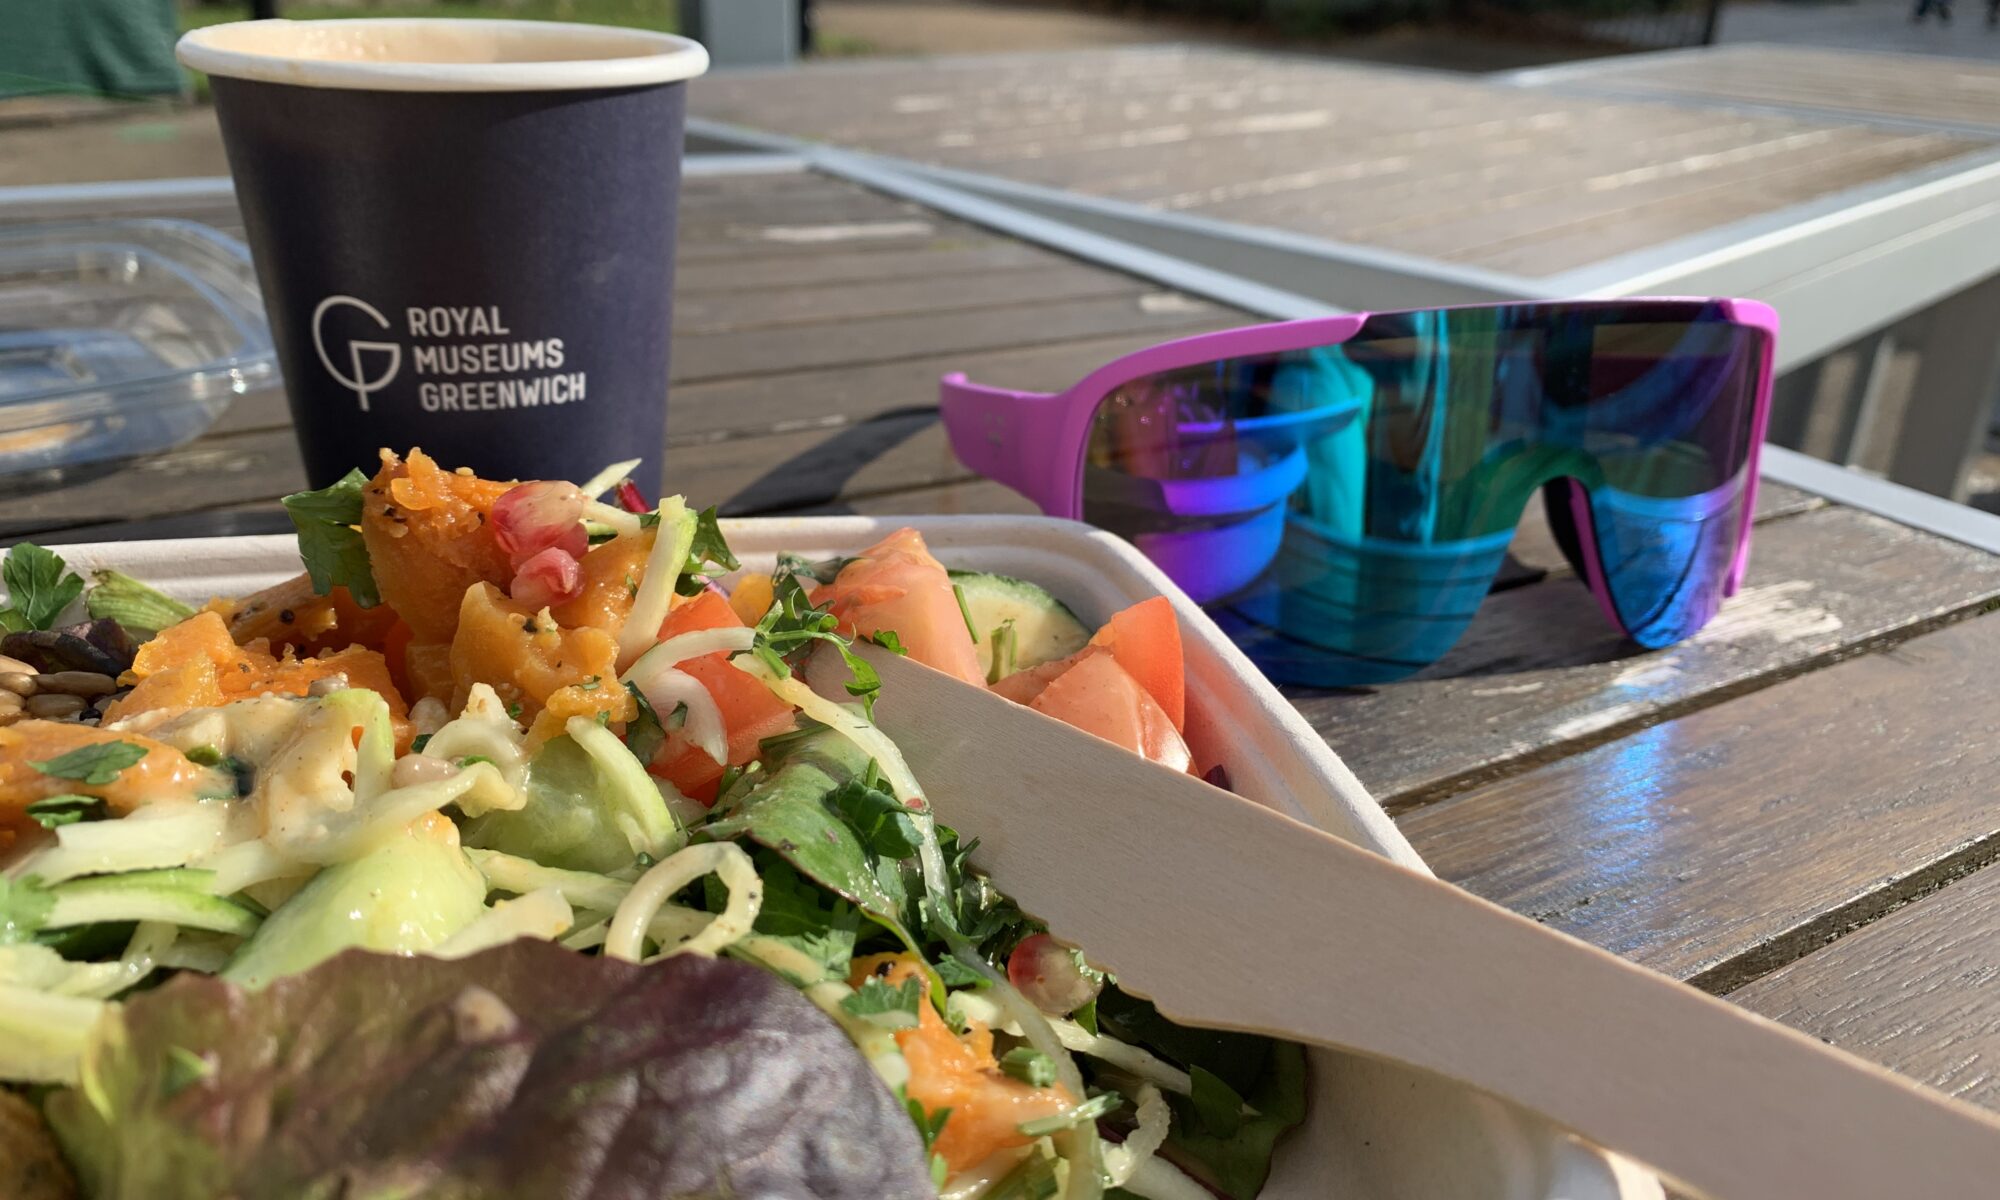 I have tried the Panda Optics while my long walk to Greenwich today. Here while having a pause and a lovely salad. Review of the Panda Optics Conquer sports lenses.